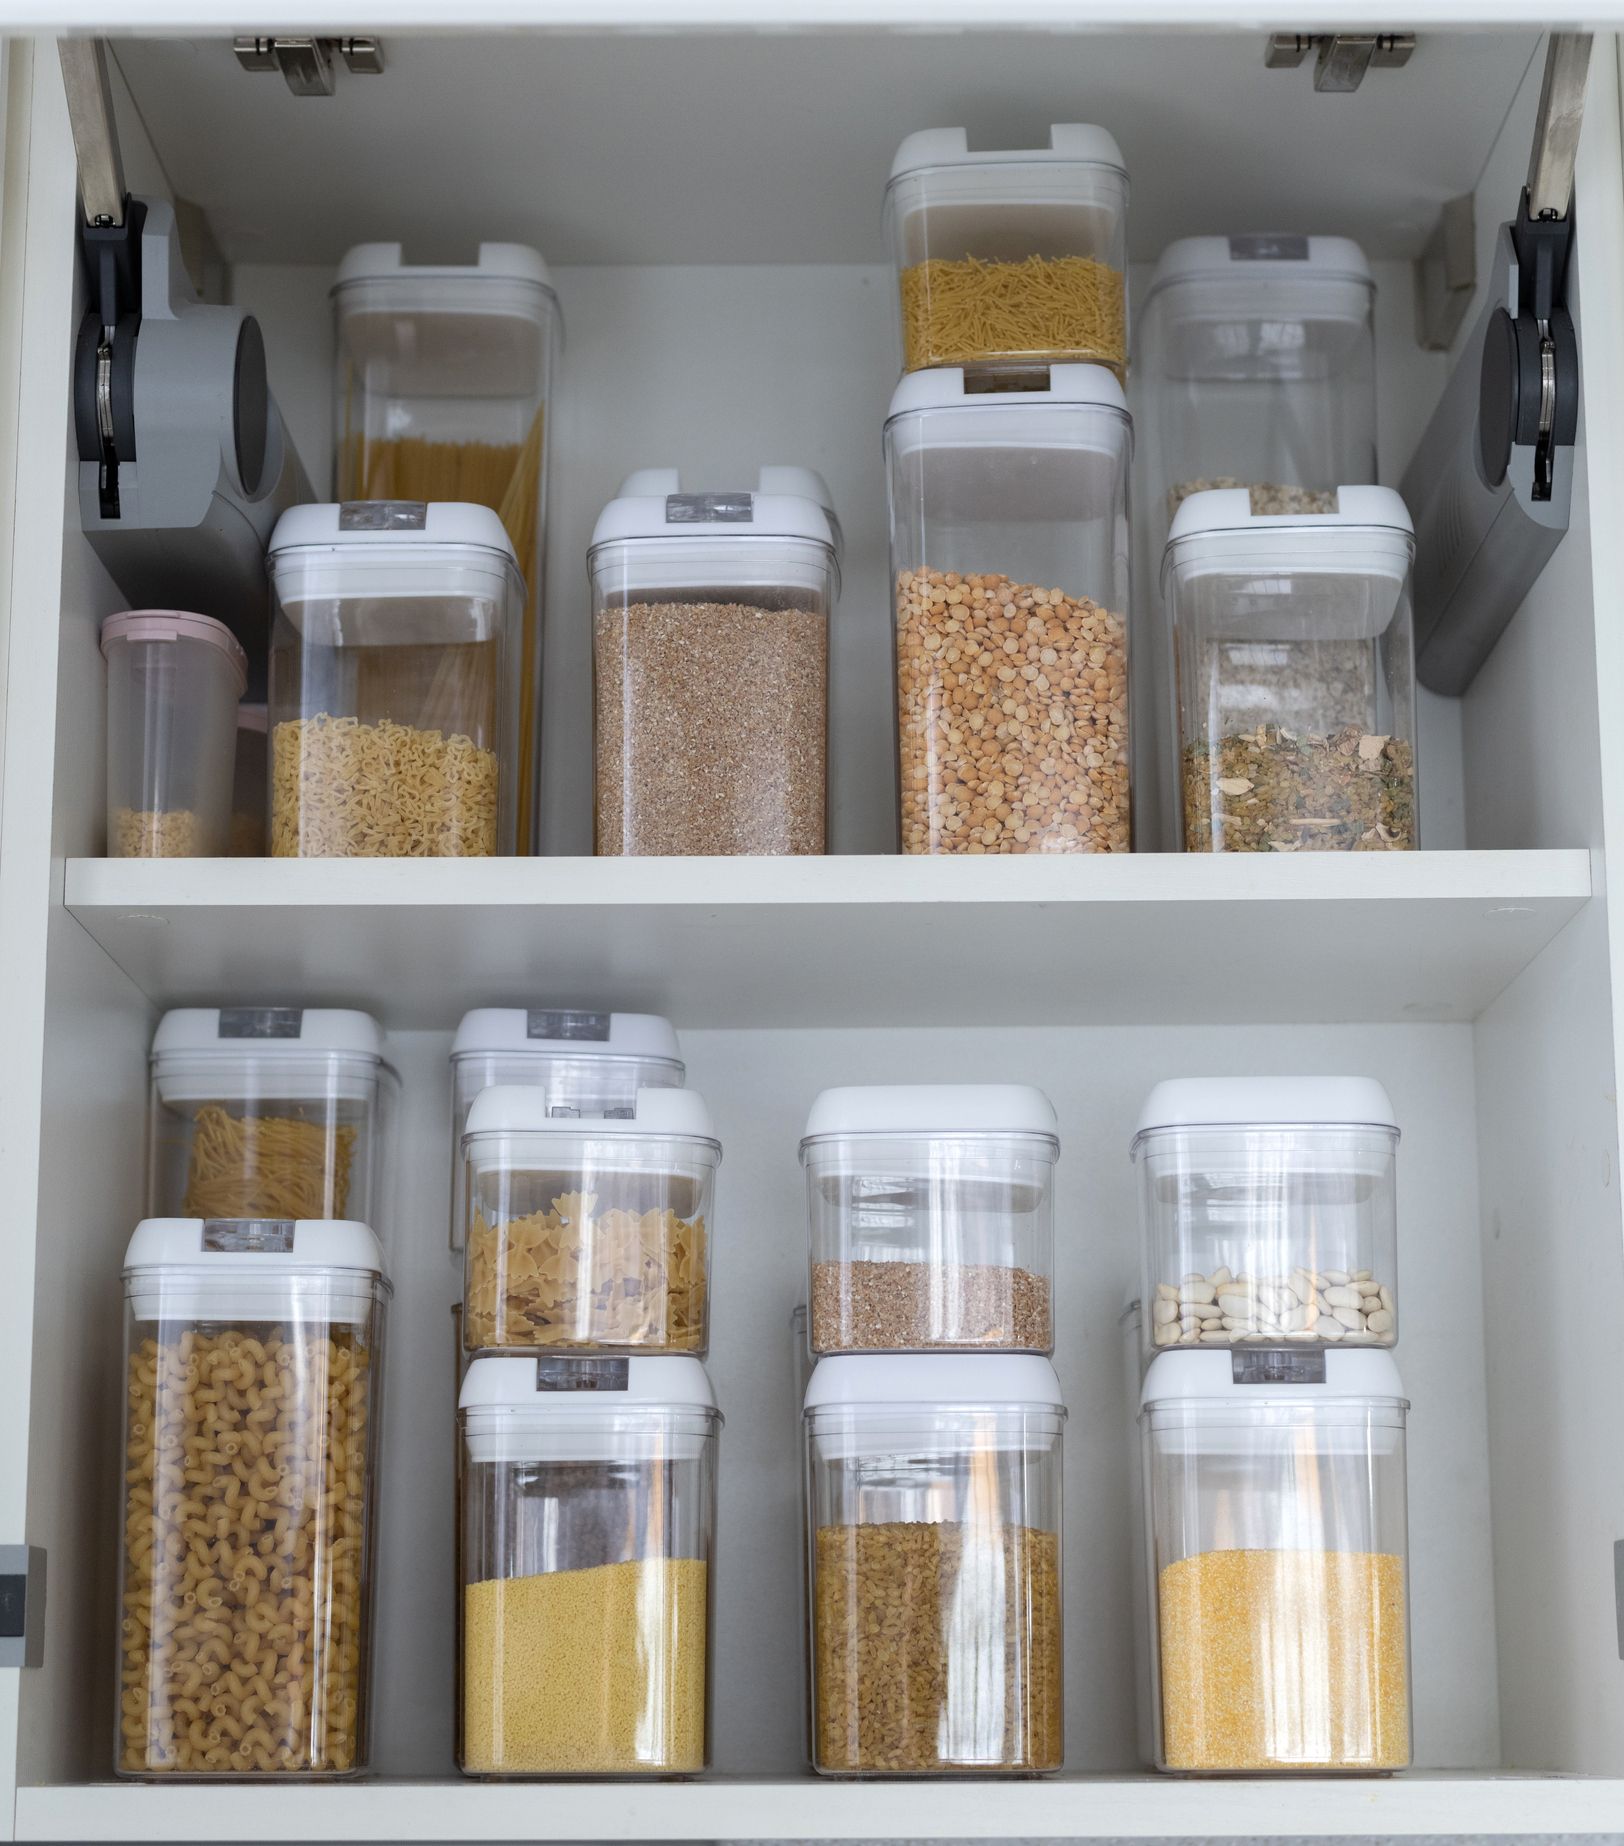 https://hips.hearstapps.com/hmg-prod/images/how-to-organize-kitchen-cabinets-65848c1f6ca01.jpg